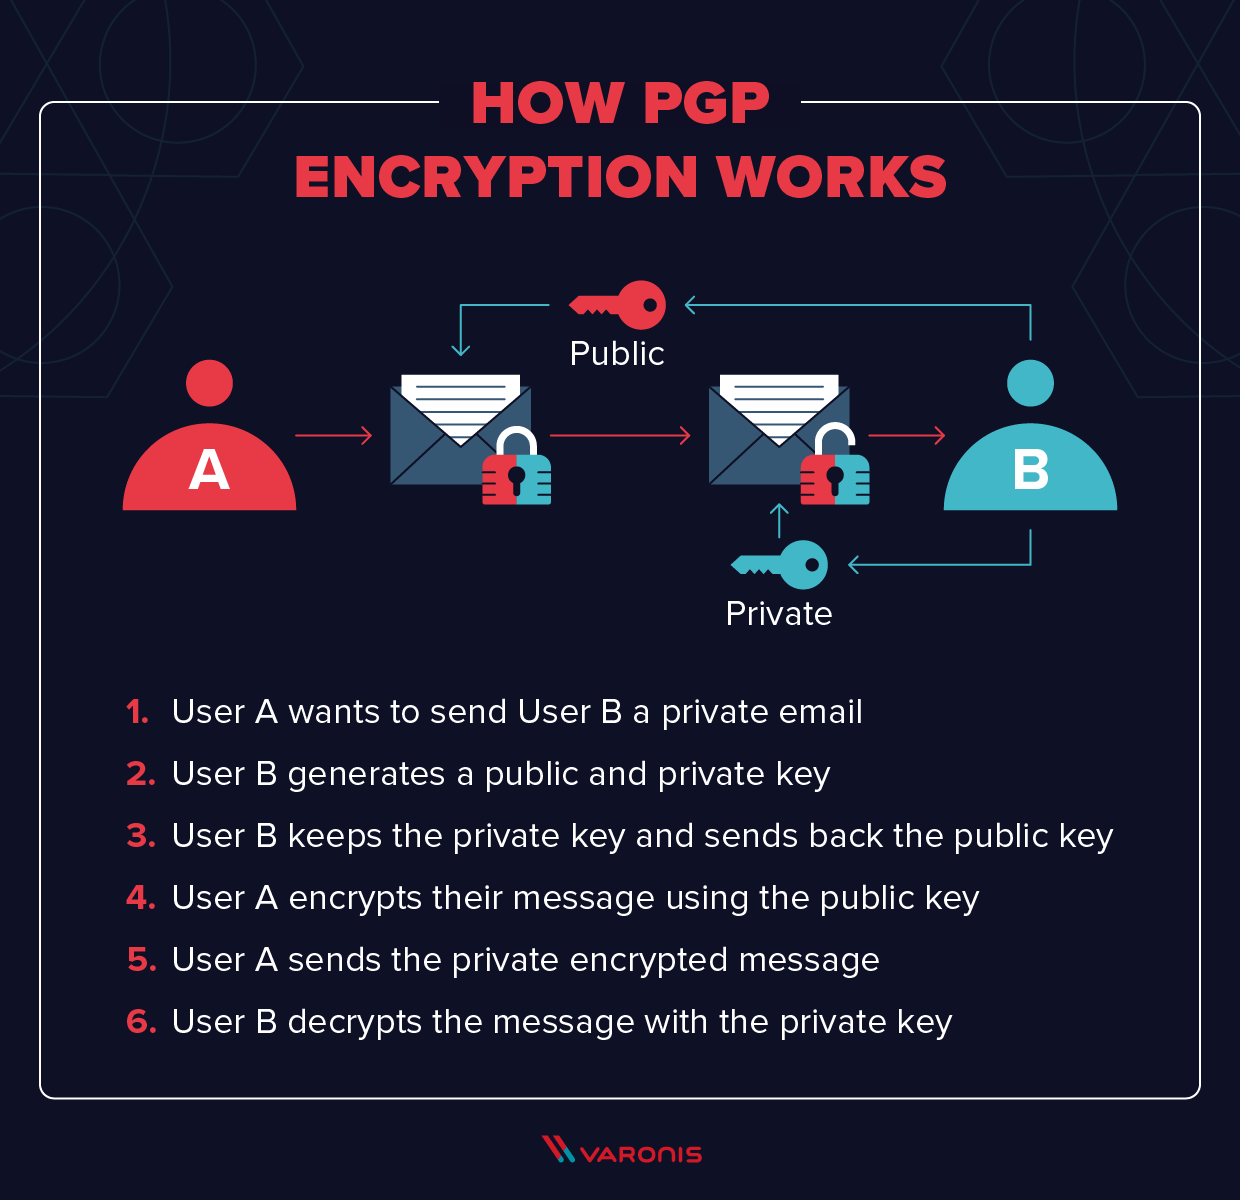 The mathematics behind encryption can get pretty complex